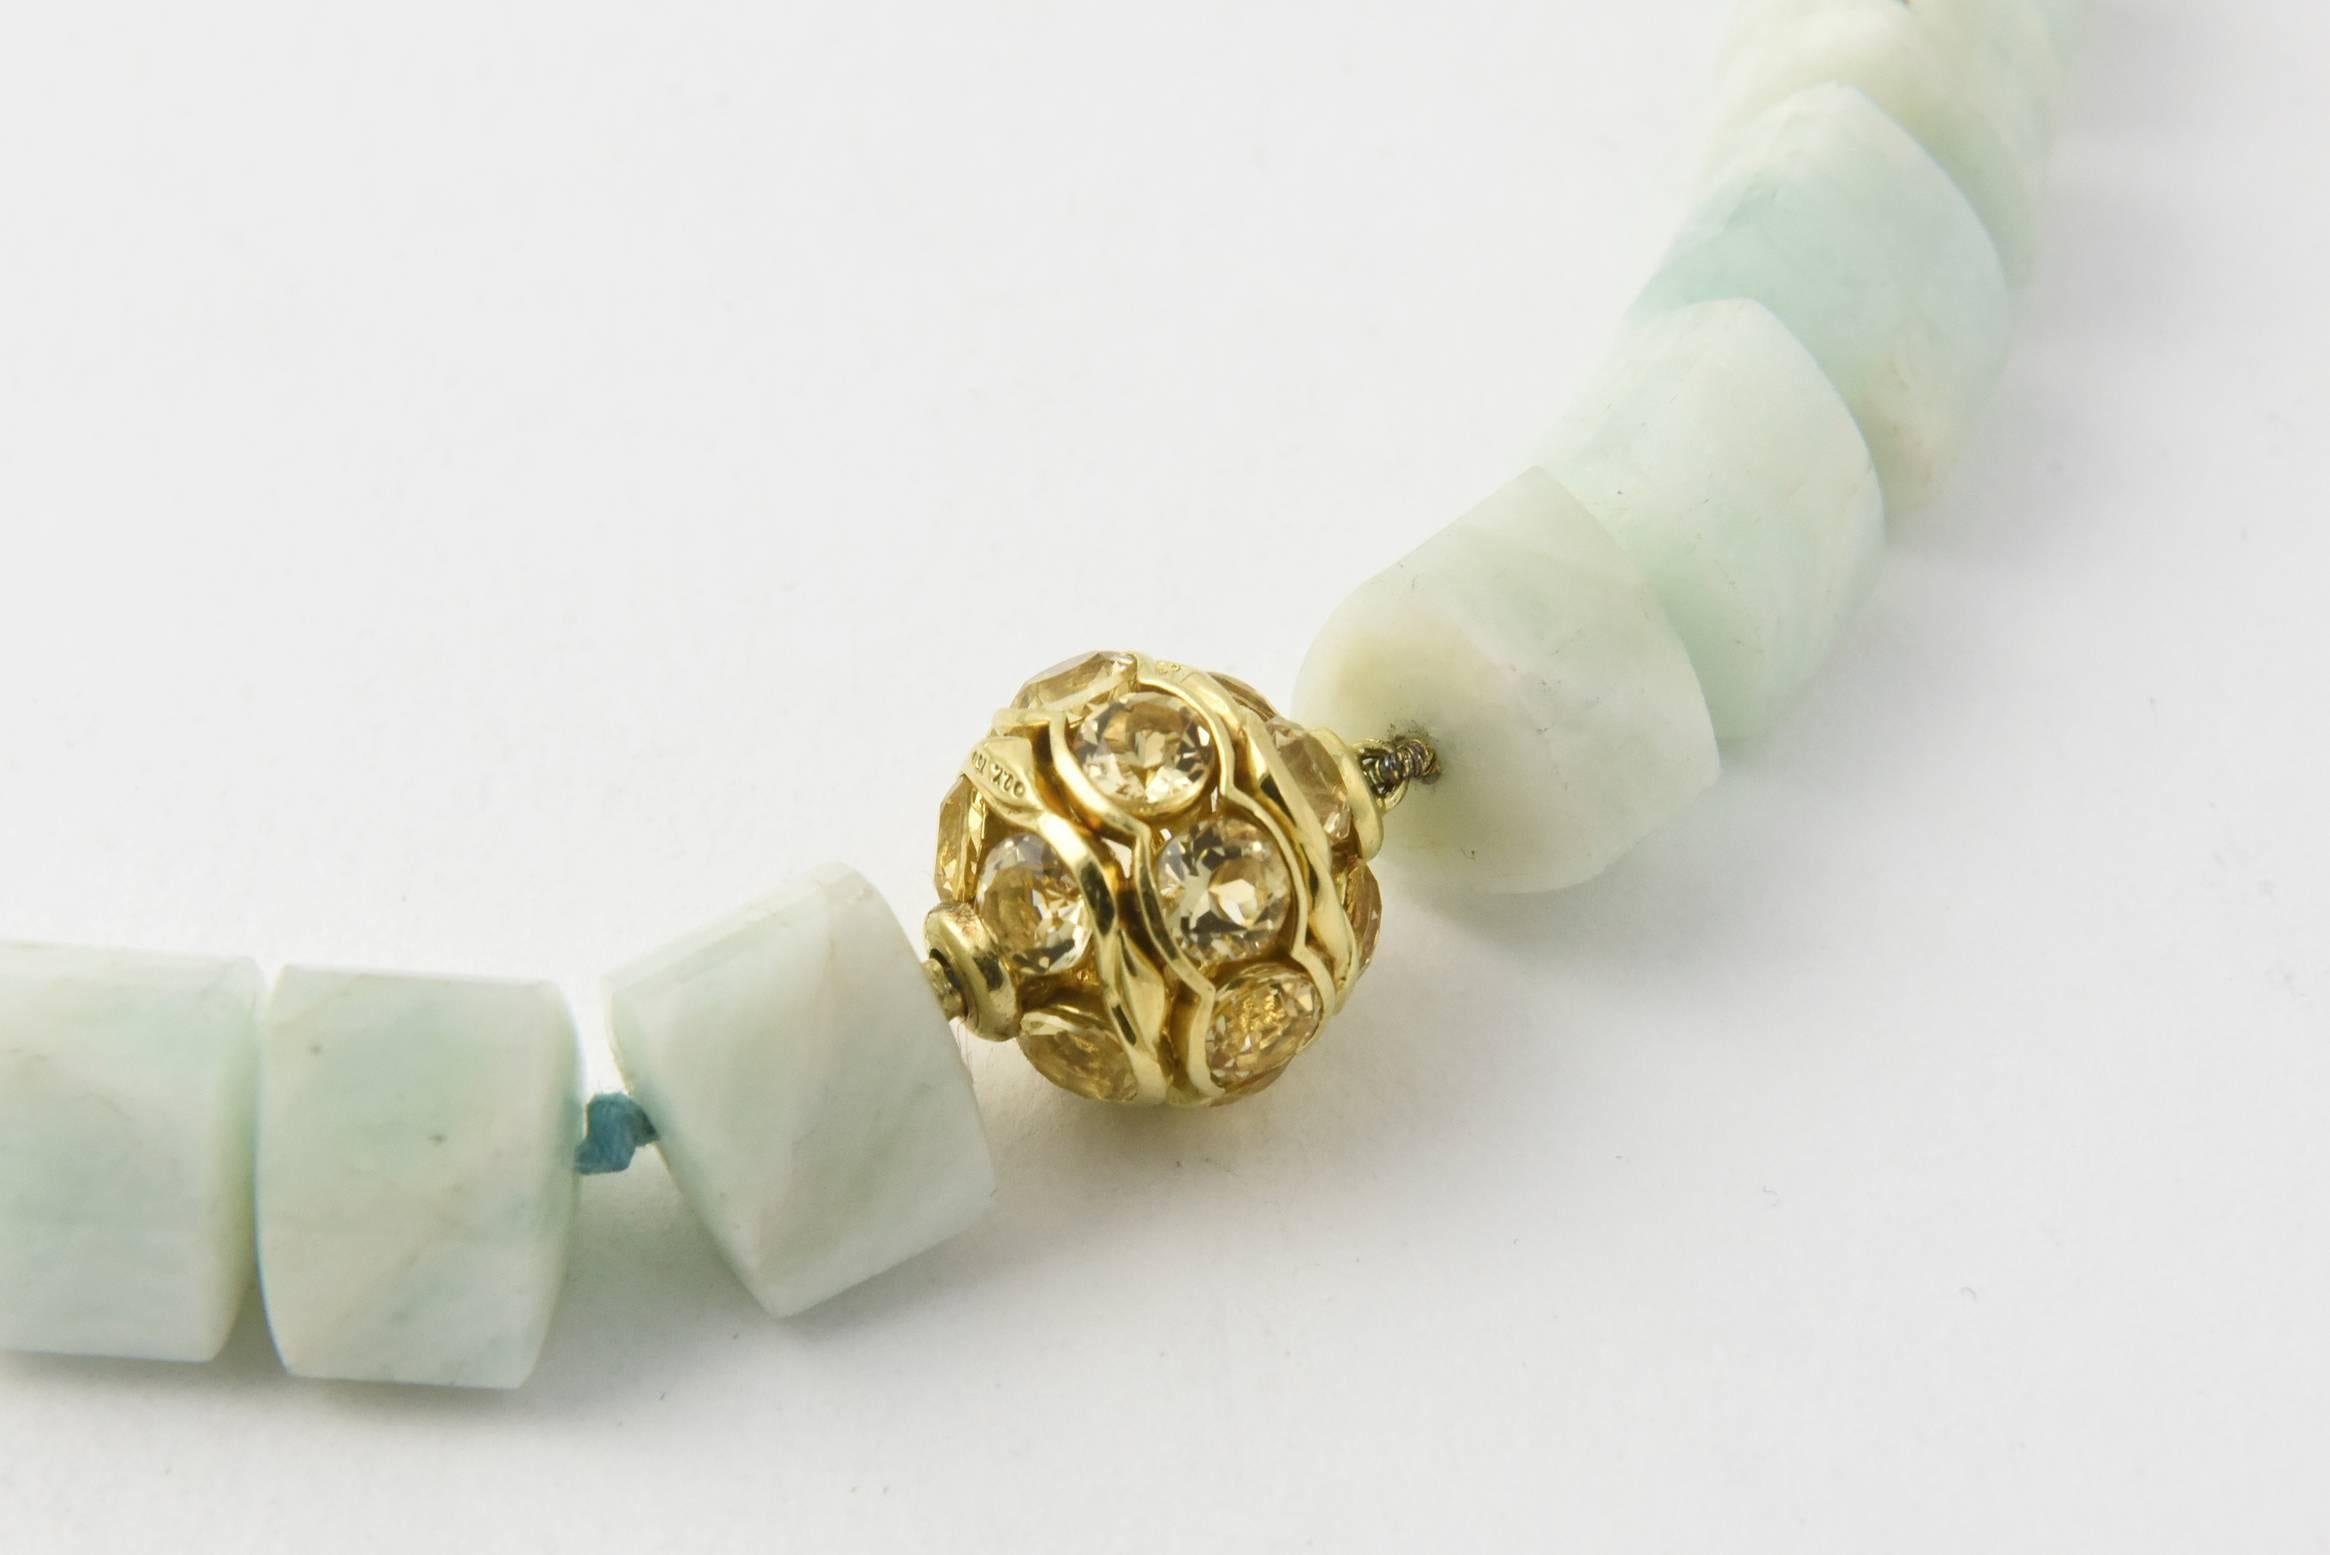 Bead David Yurman Couture Collection Aquamarine Necklace with Citrine and Gold Clasp